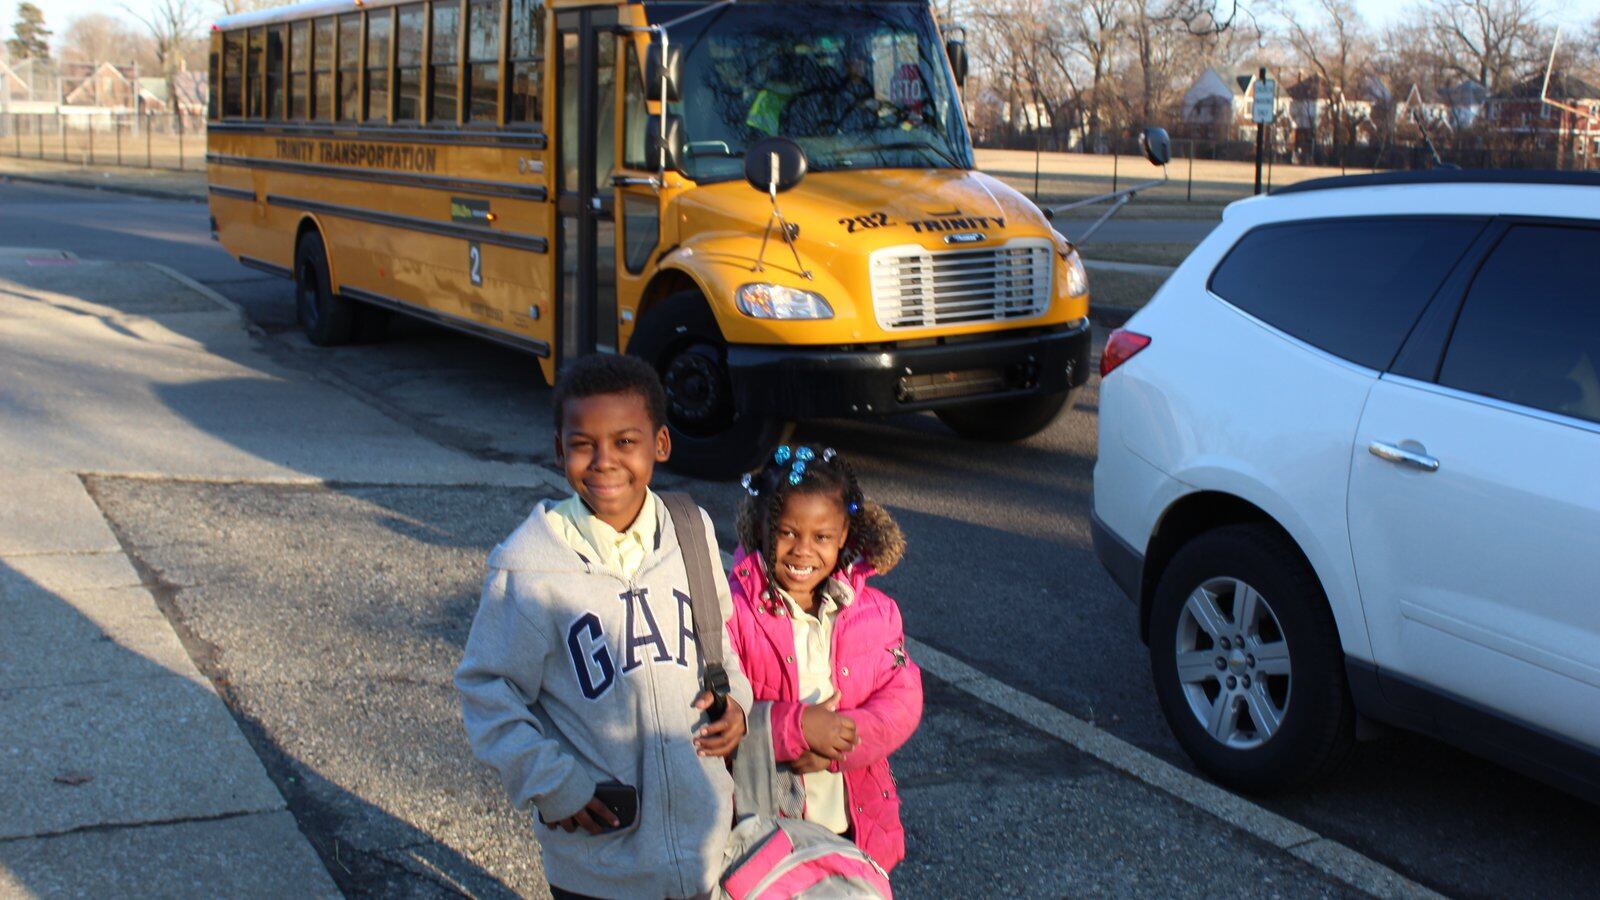 Two young children stand in front of a yellow school bus.